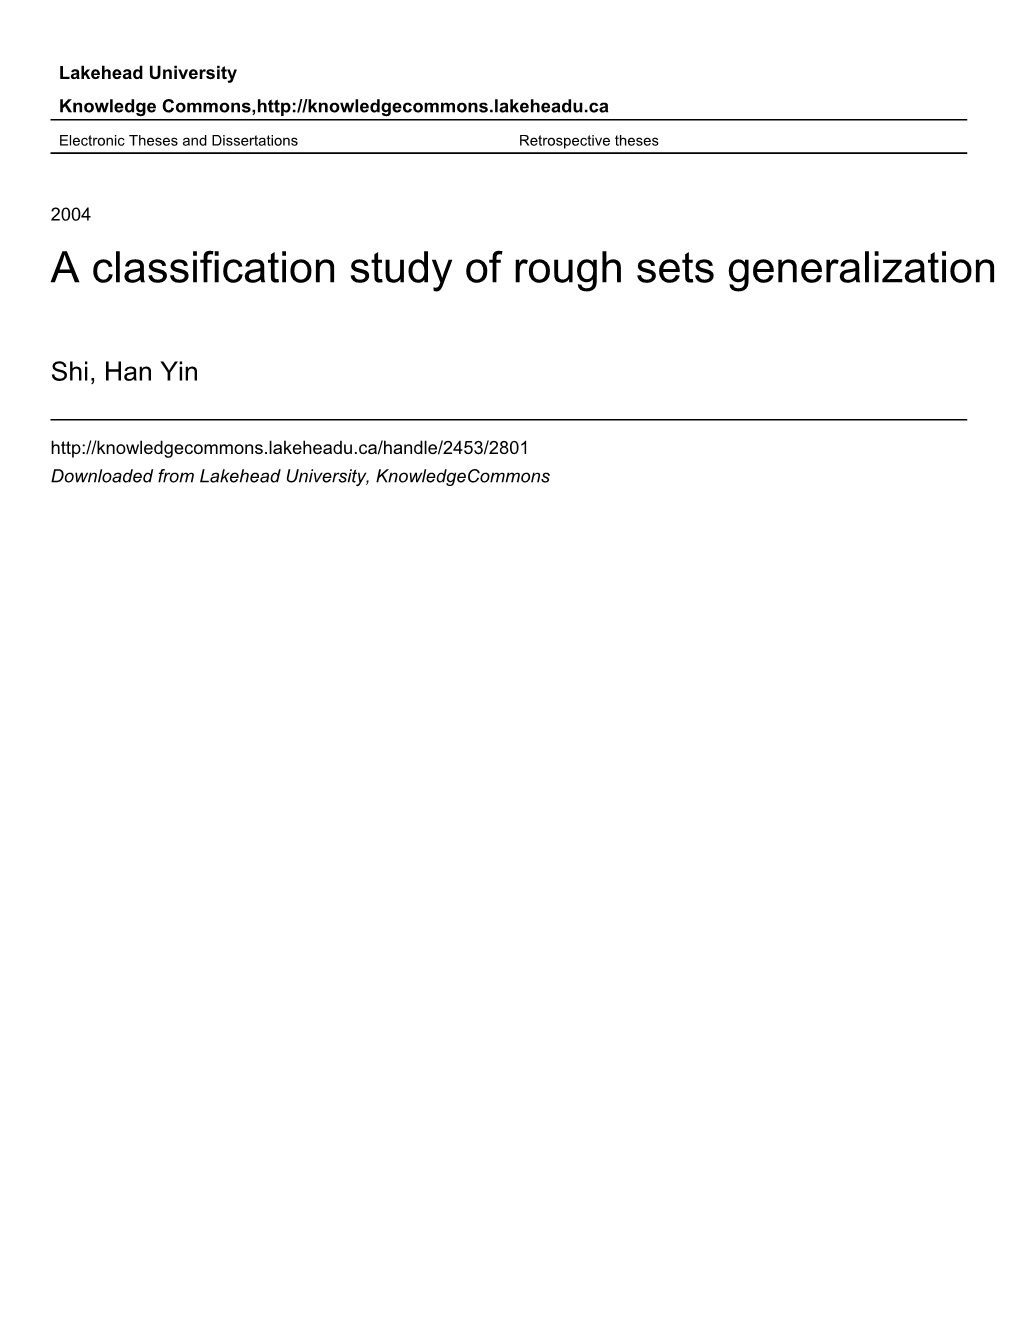 A Classification Study of Rough Sets Generalization